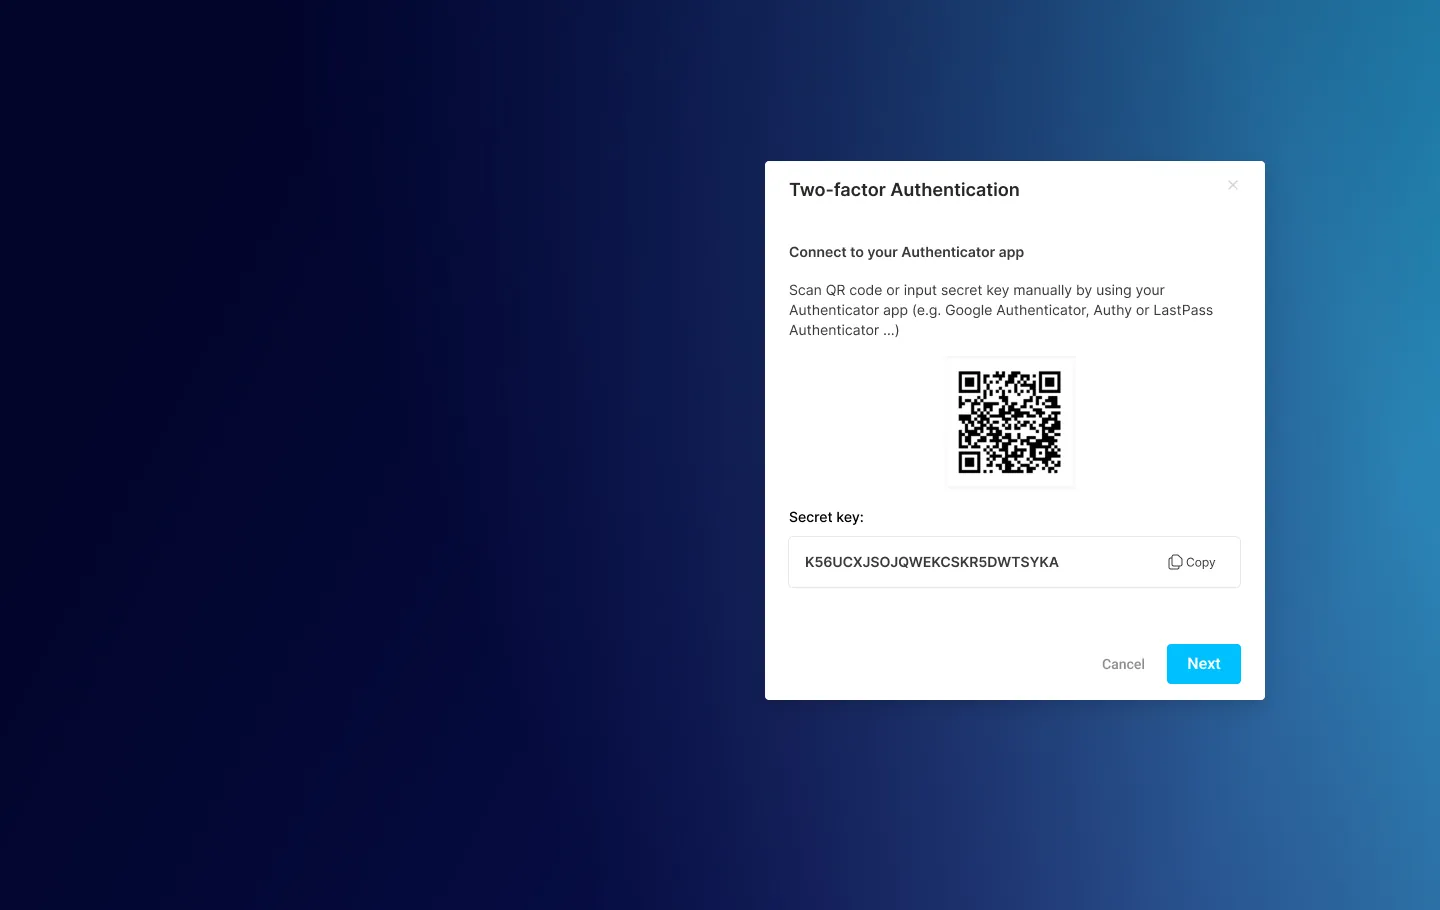 Blue background, a QR on the right side